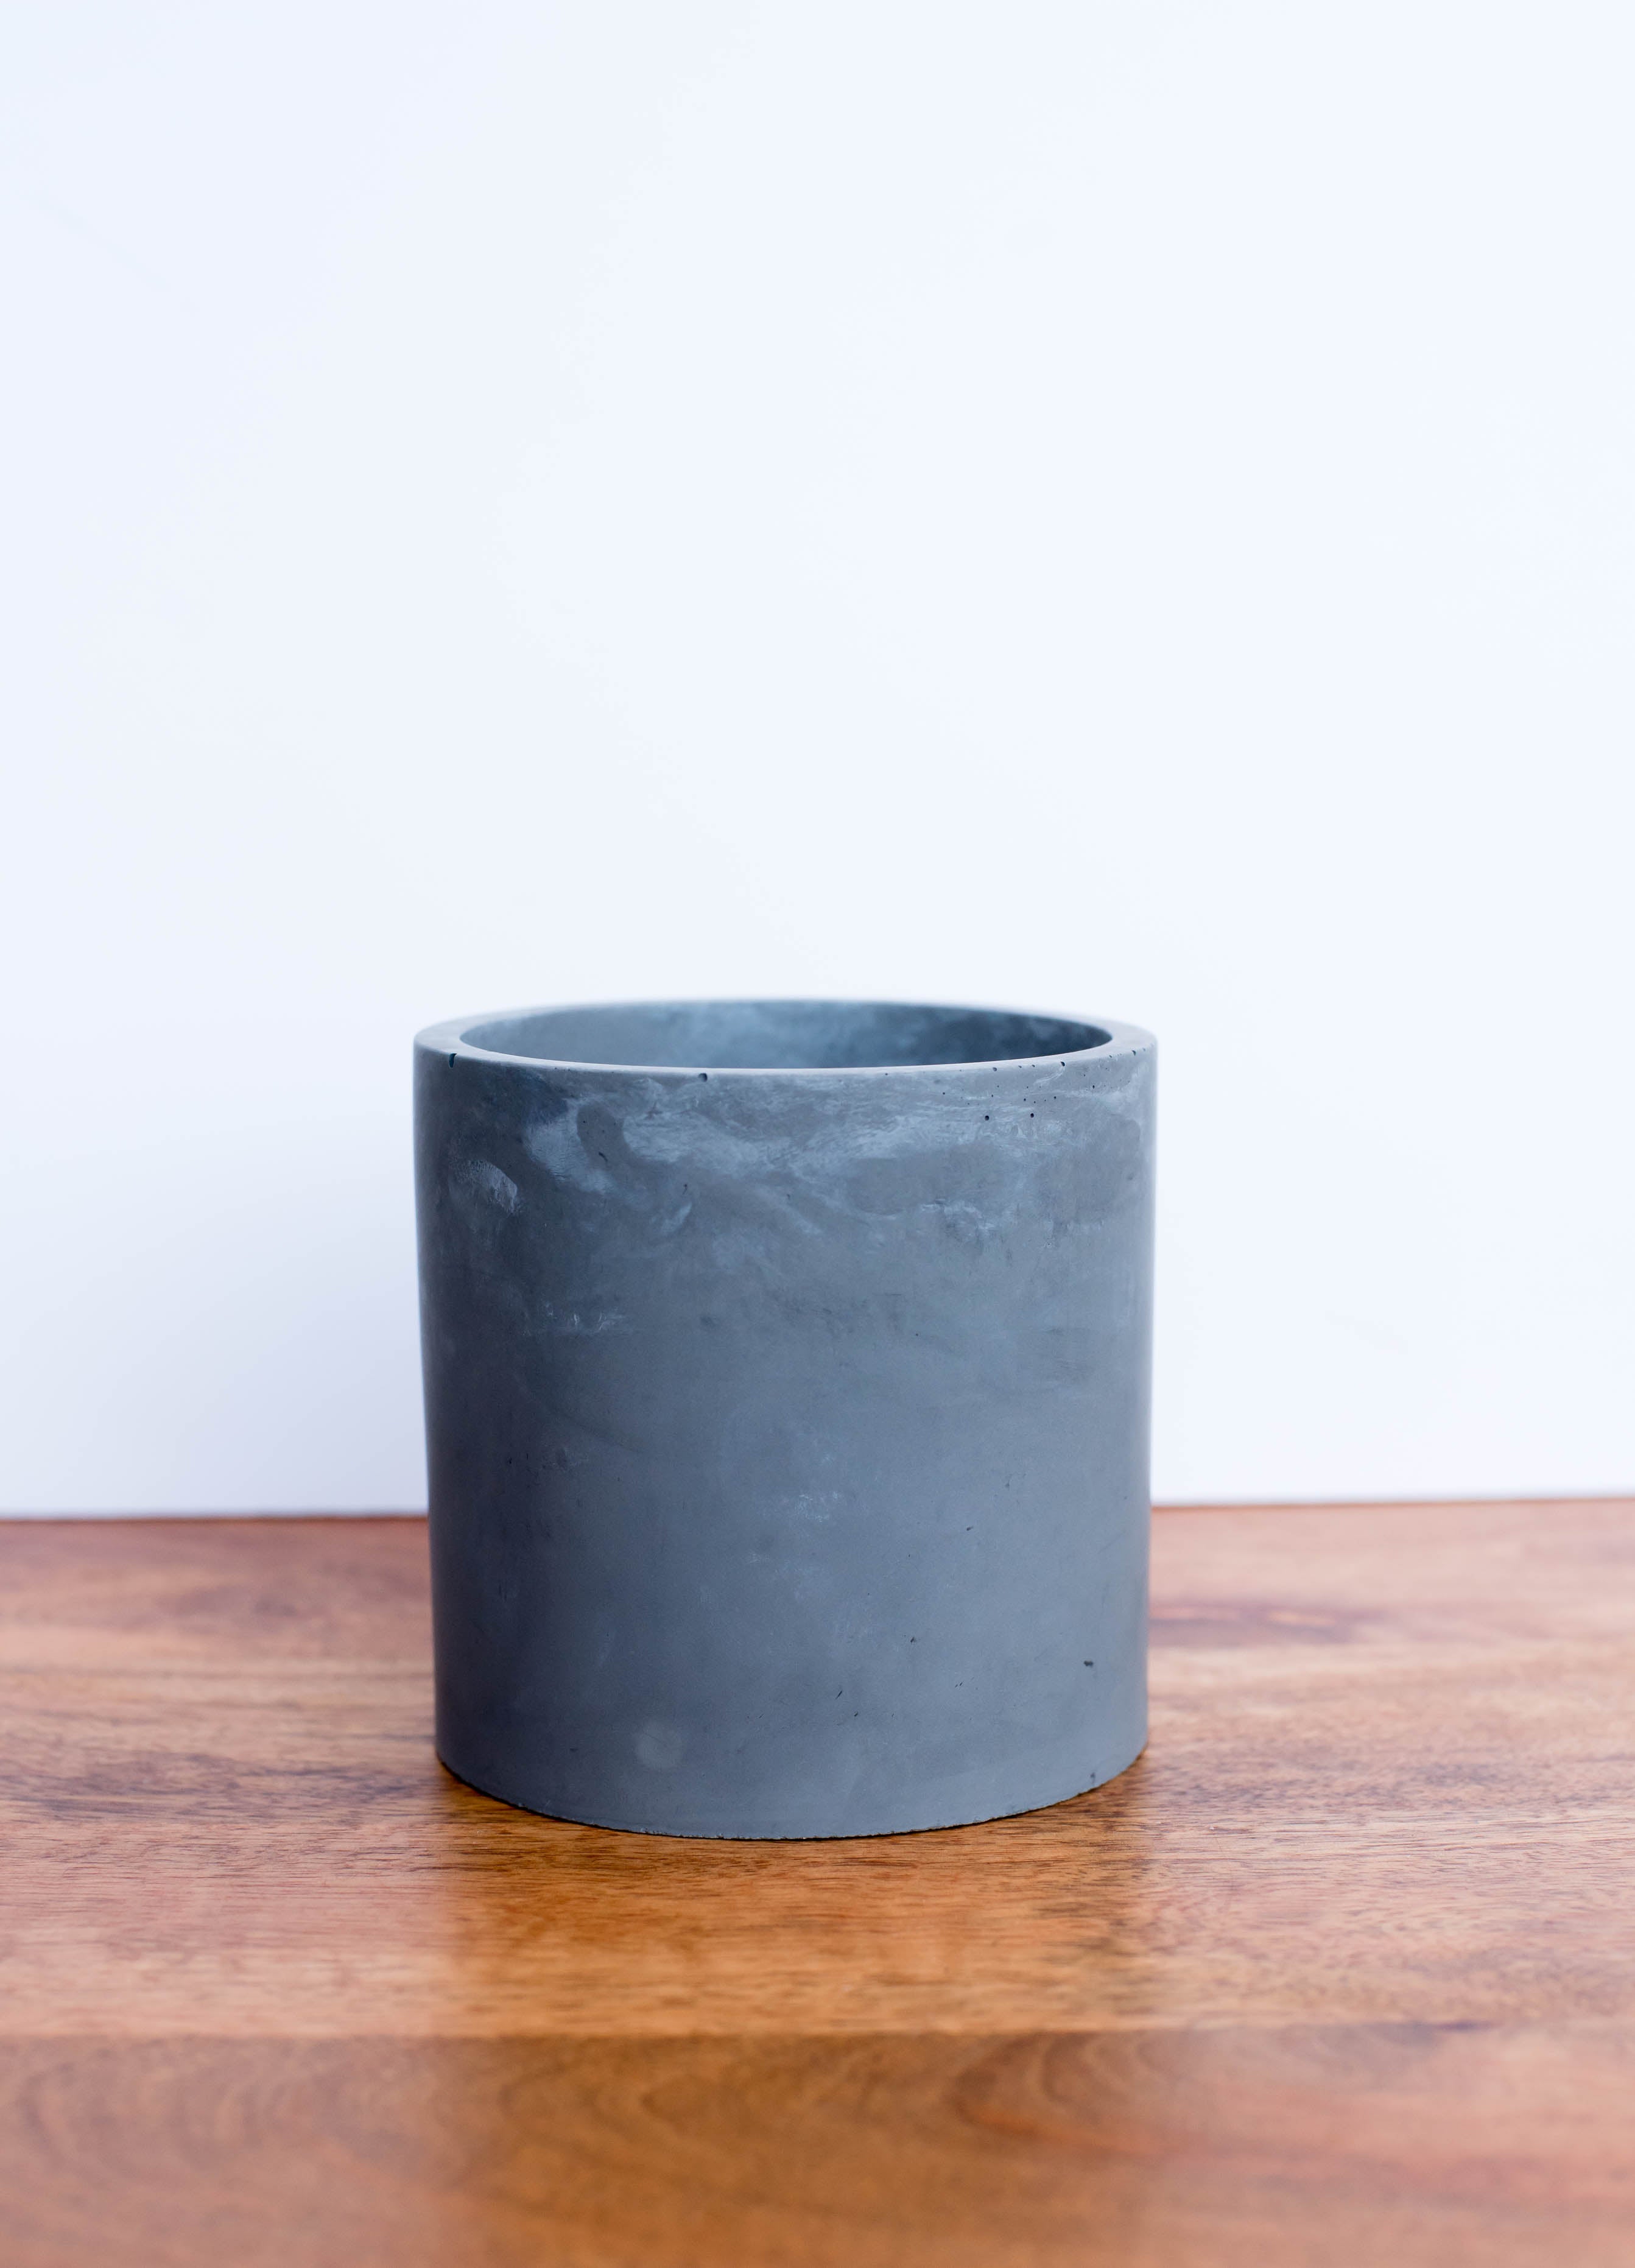 Large Cylinder Concrete Candle - made by kippen